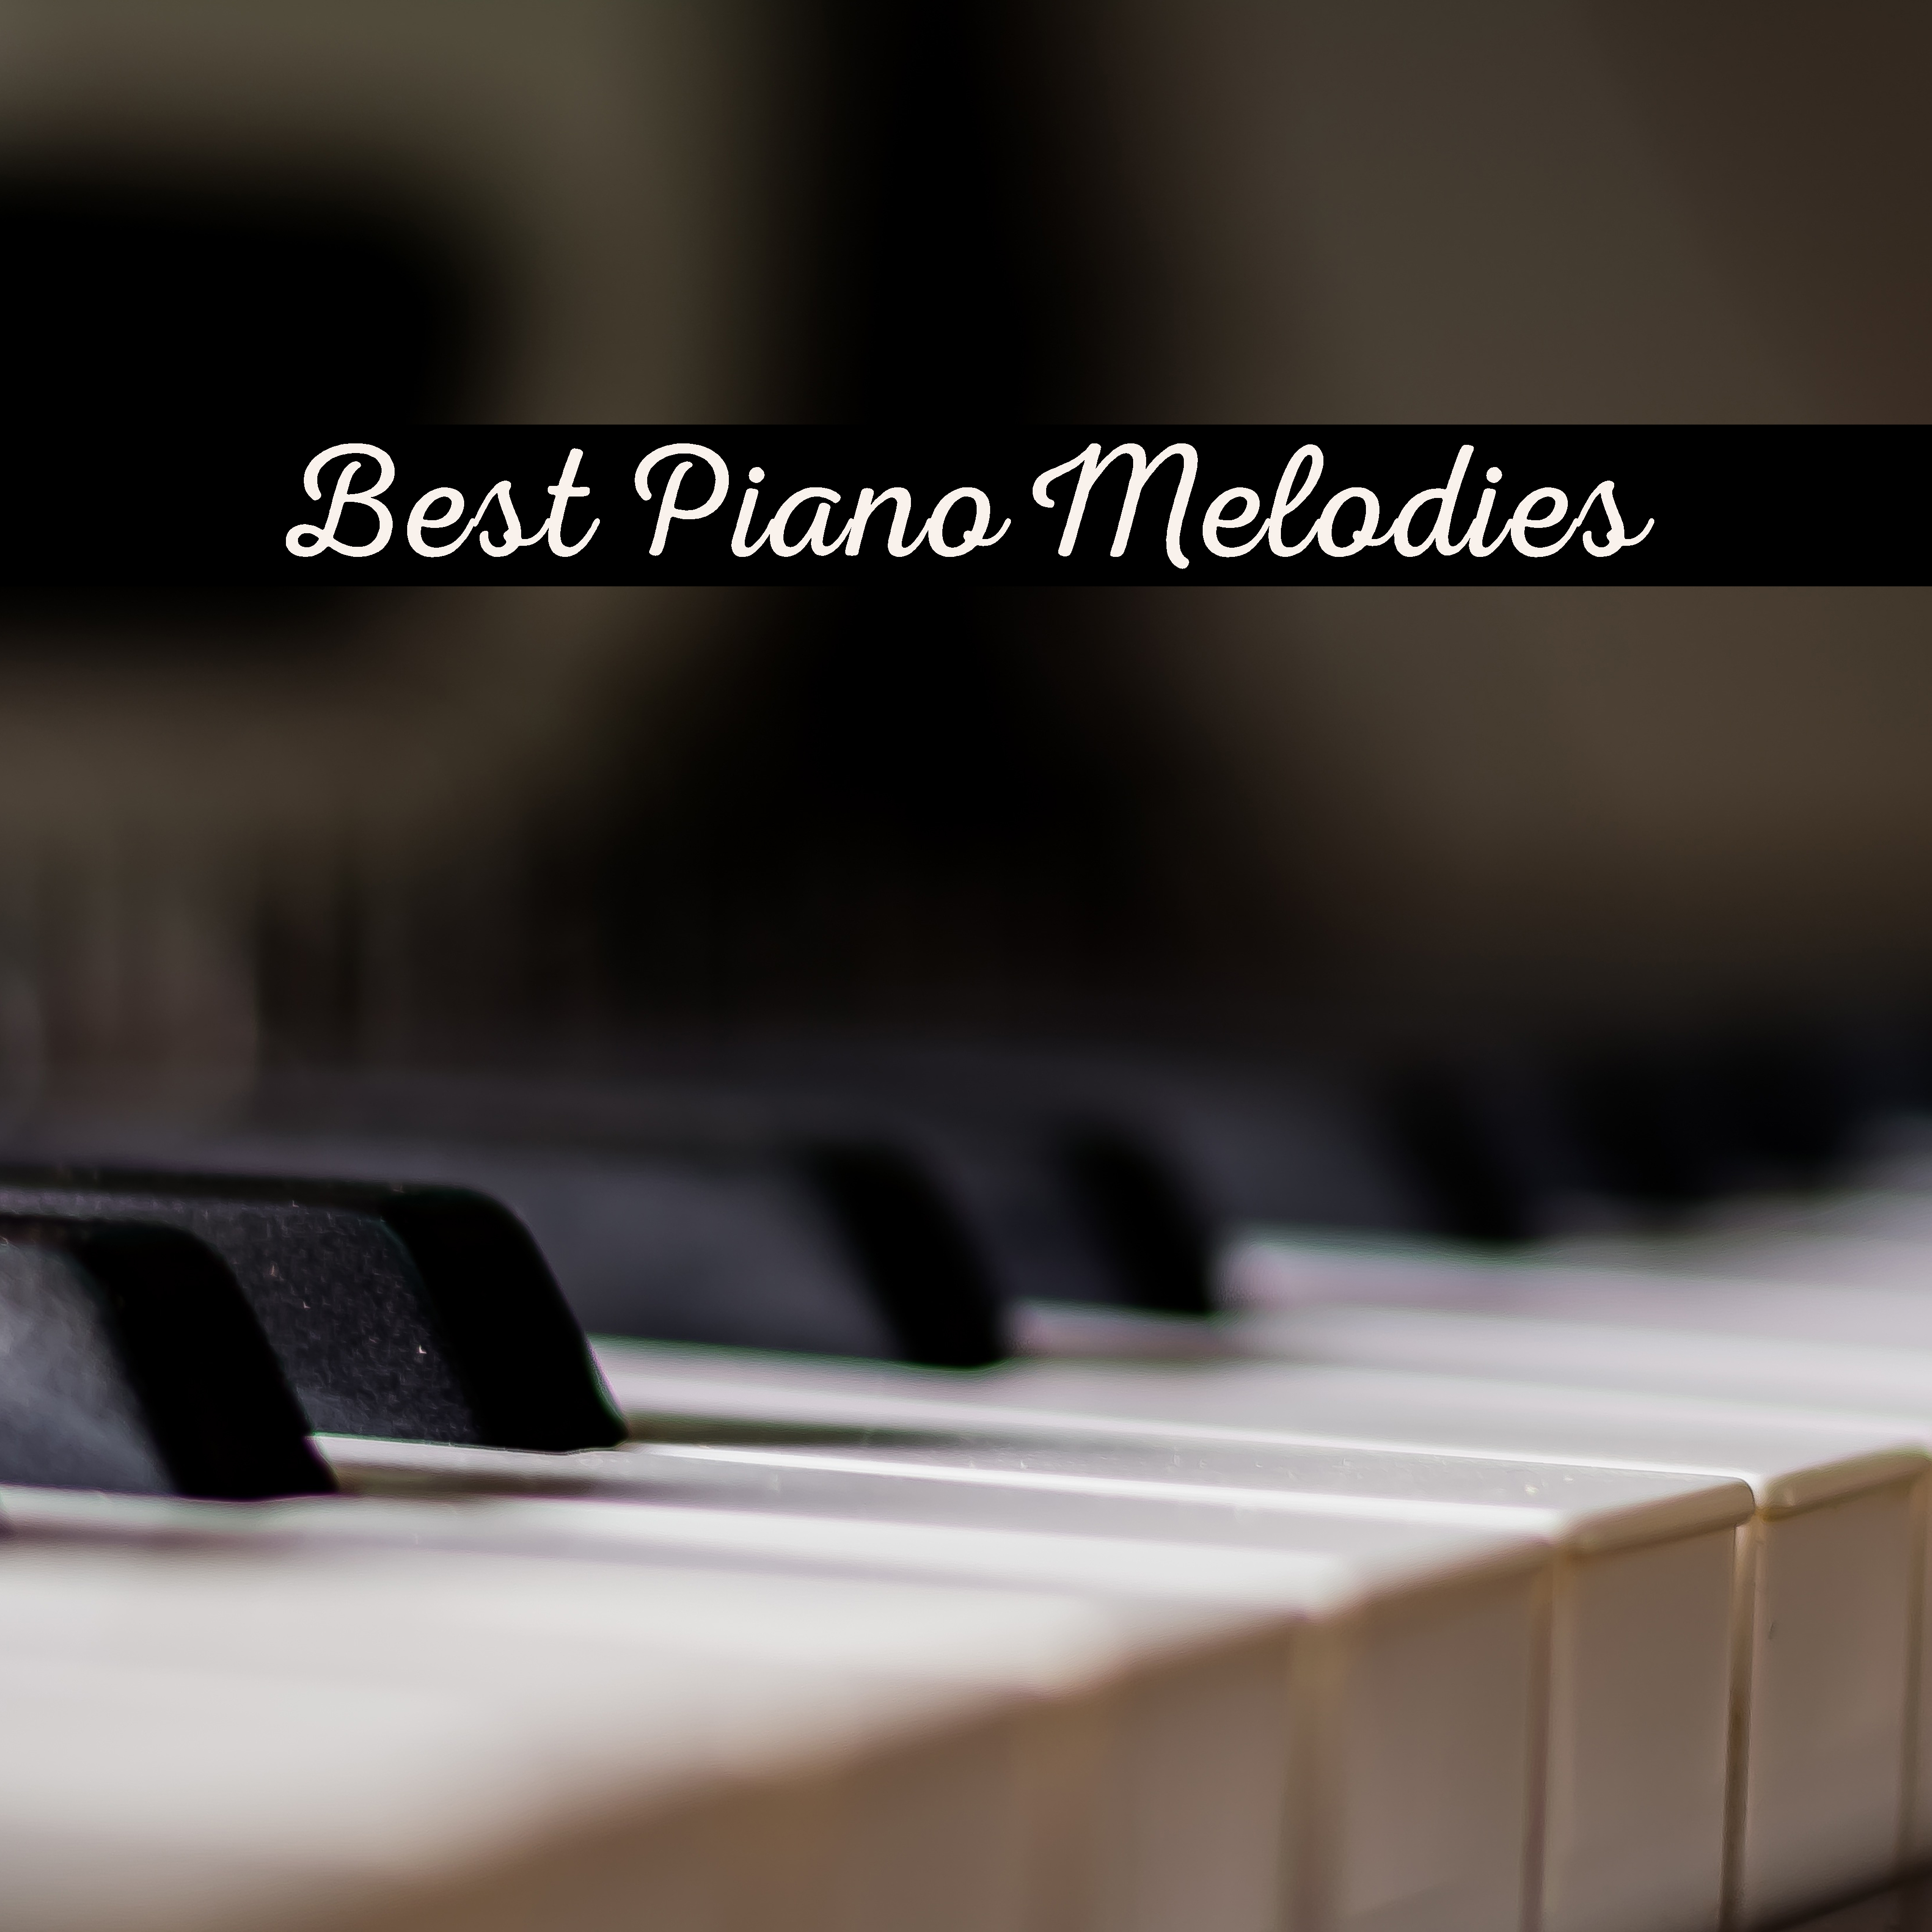 Best Piano Melodies